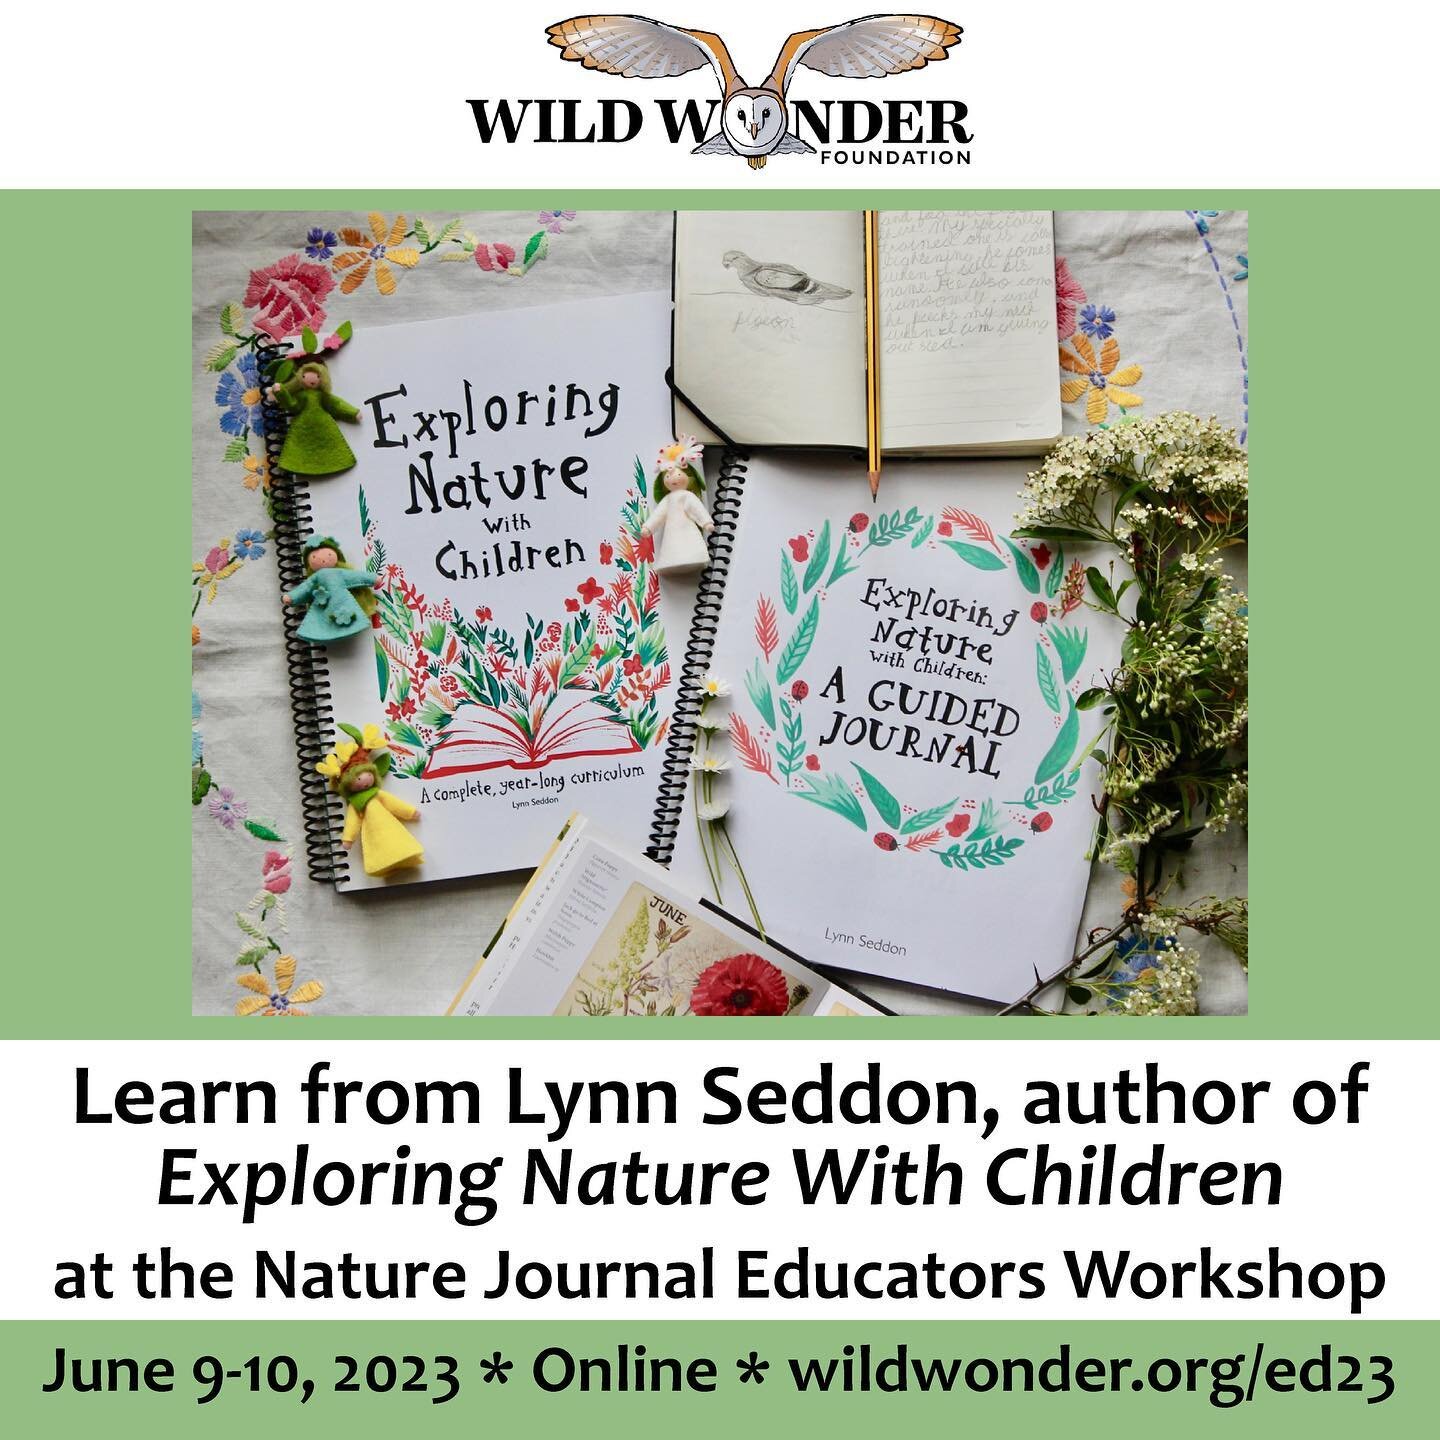 Do you teach nature journaling or do you want to learn how to teach nature journaling? Visit wildwonder.org/ed23 to register now for the Wild Wonder Nature Journal Educators Workshop, online June 9-10, 2023, and get inspired with the latest best prac